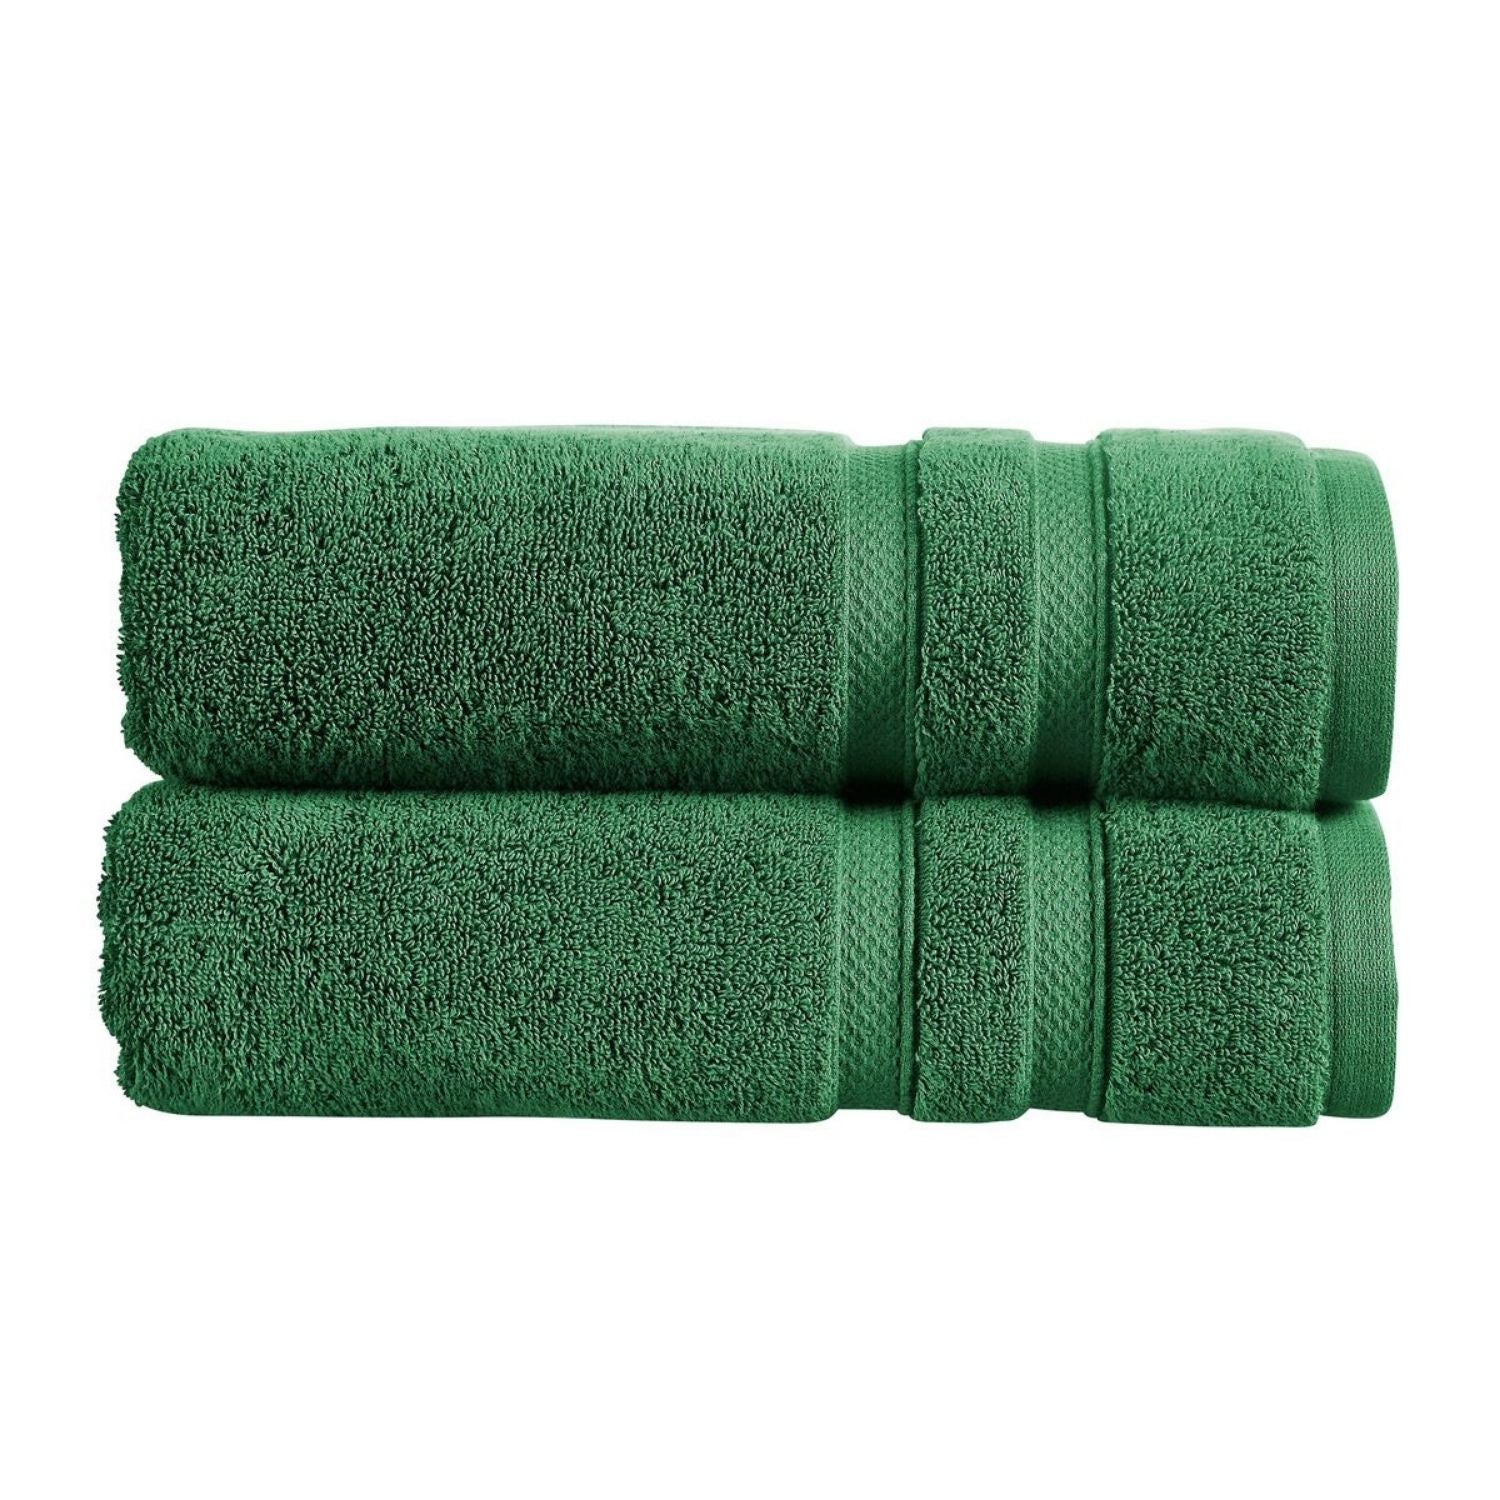 Christy Chroma Bath Towel - Forest - Green 1 Shaws Department Stores